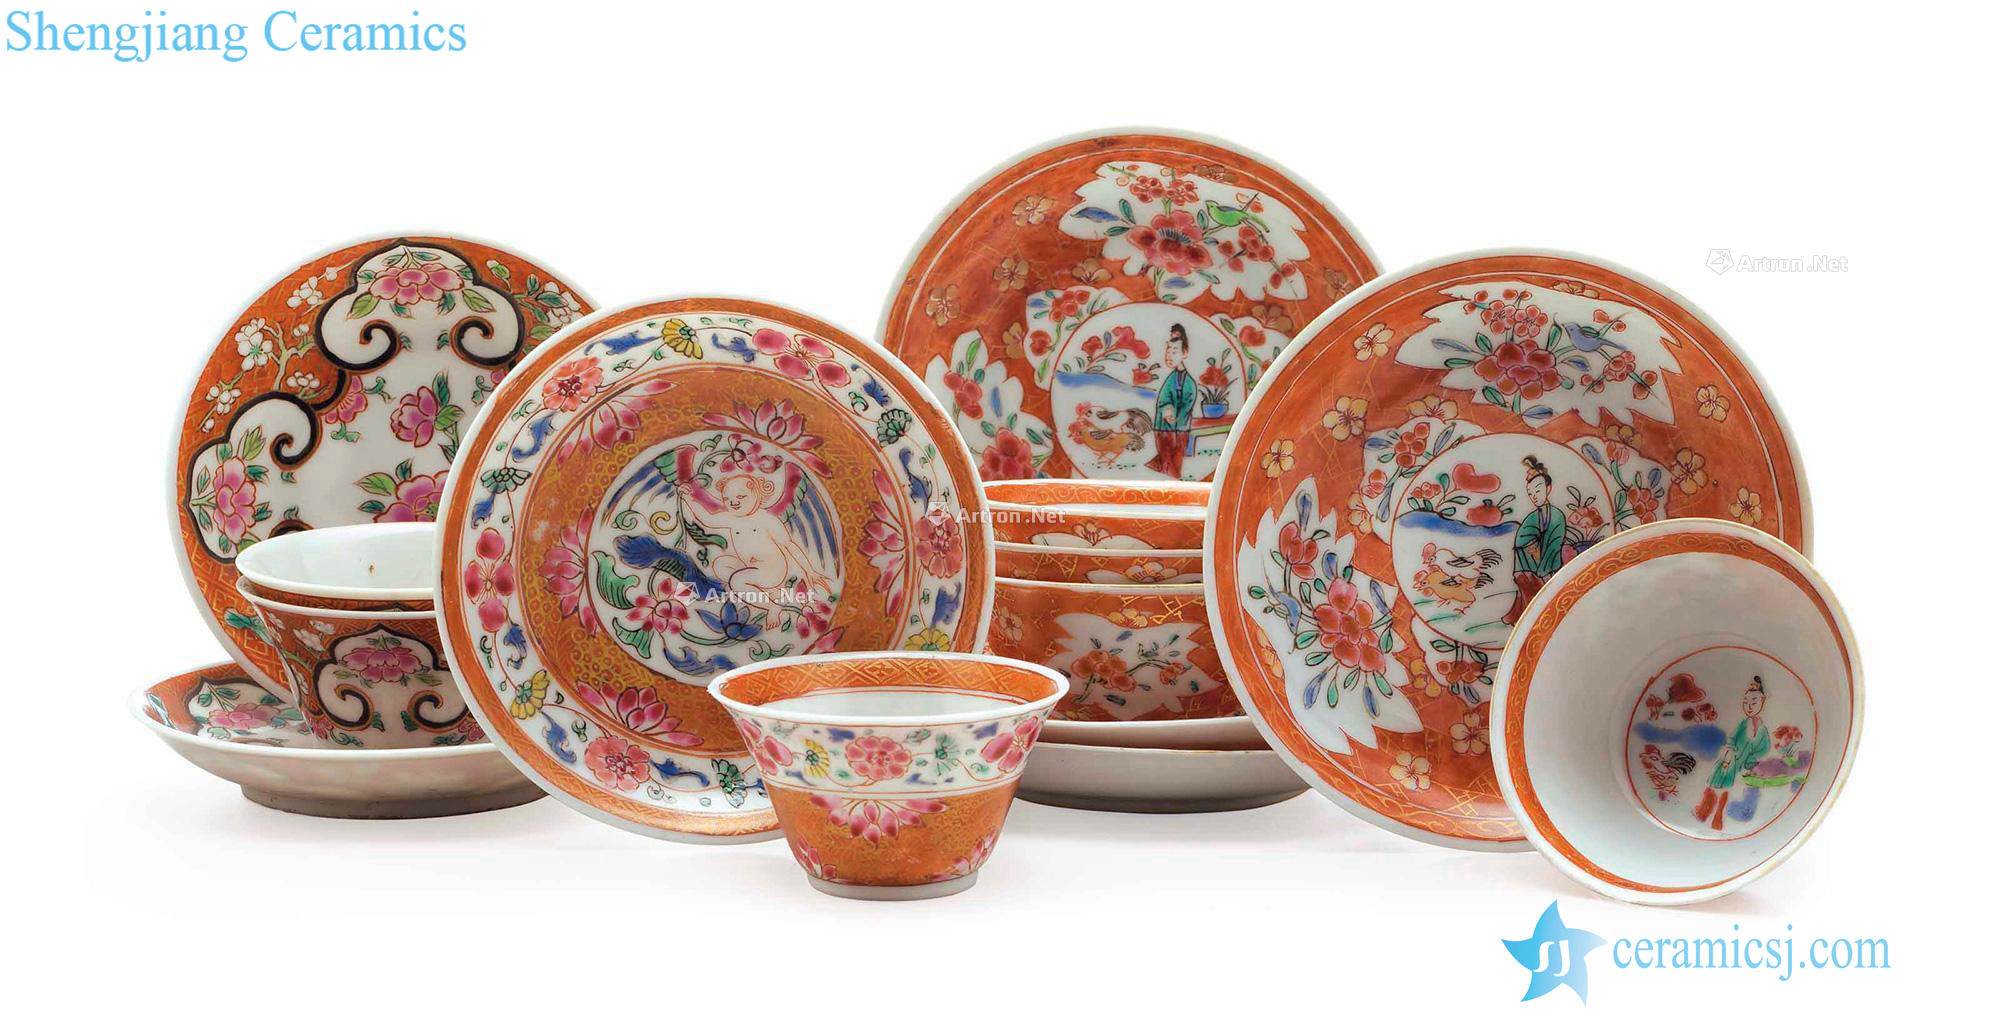 Qianlong period, 1736-95, A GROUP OF FAMILLE ROSE TEABOWLS AND SAUCERS